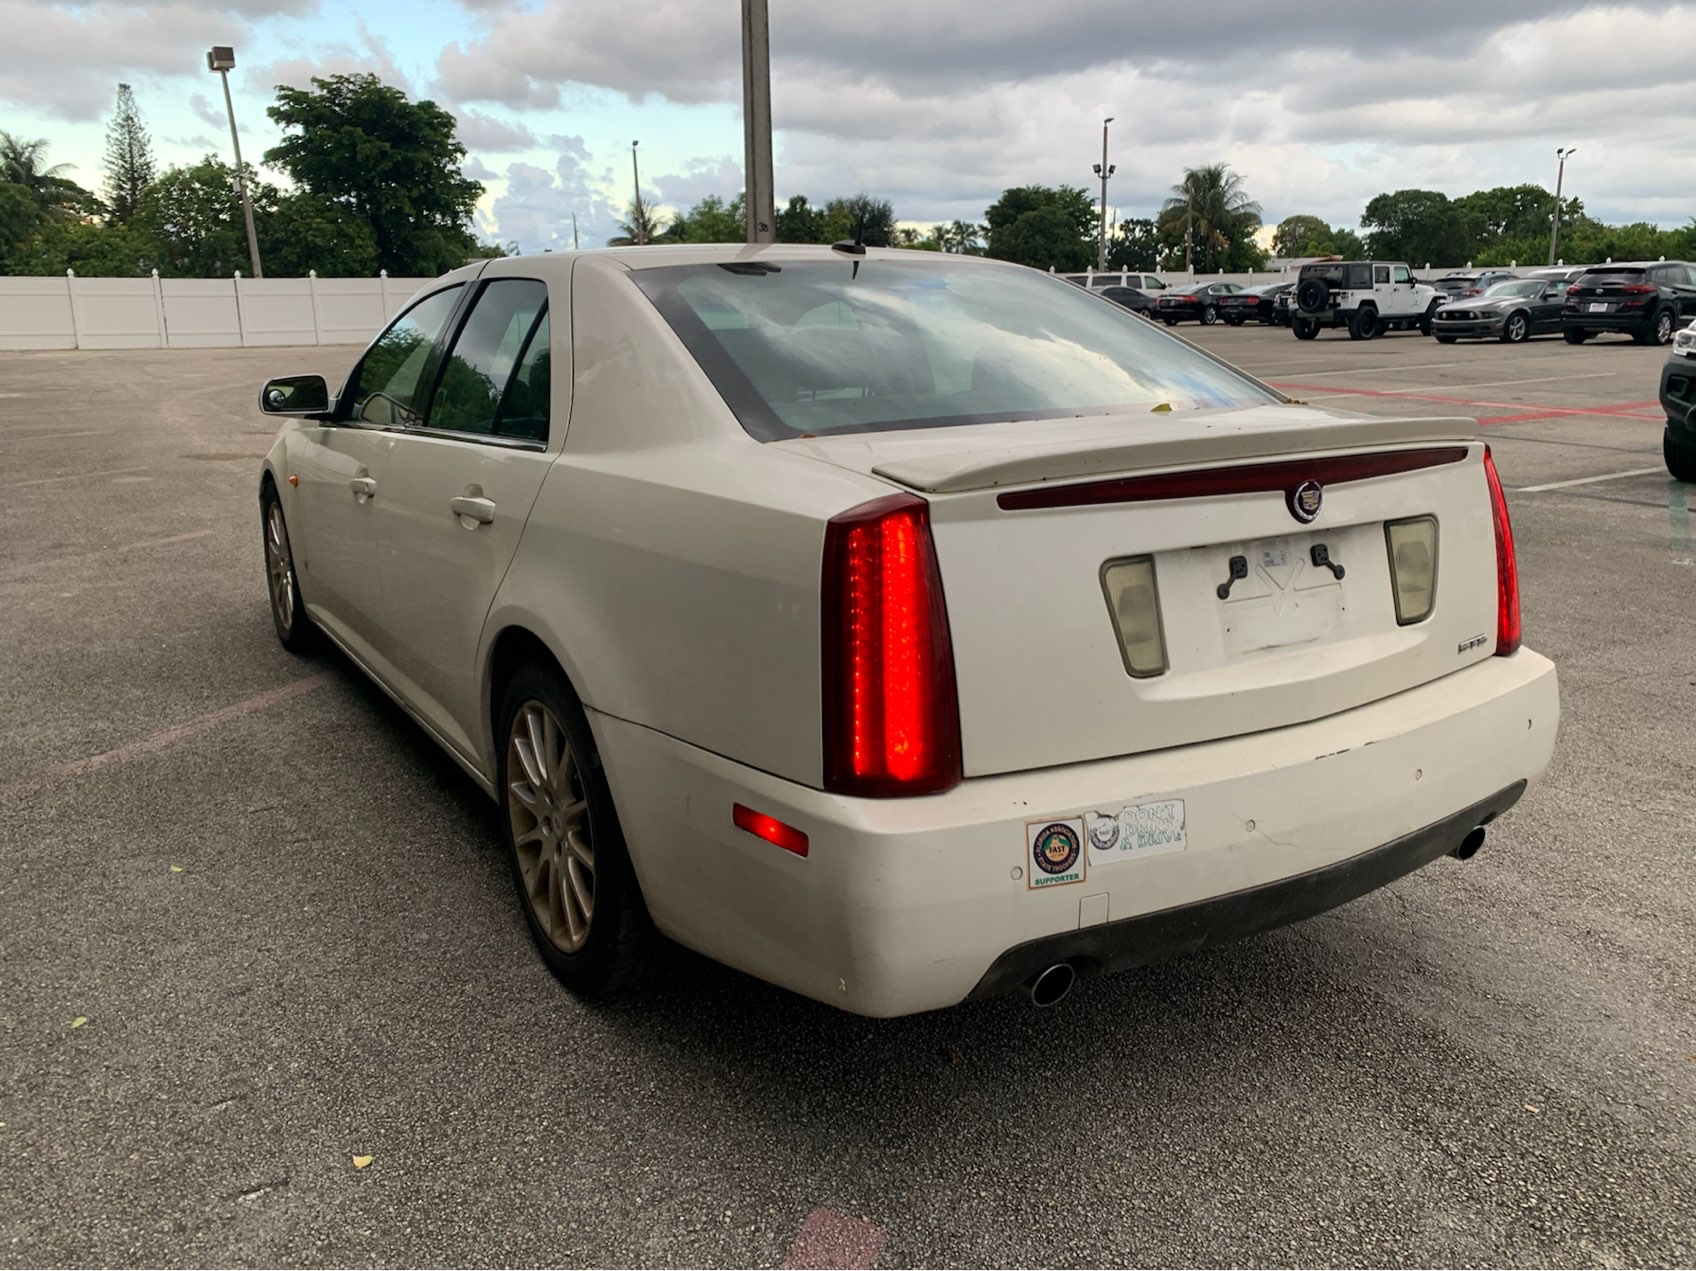 Used 2006 CADILLAC STS for sale in MIAMI | 129668